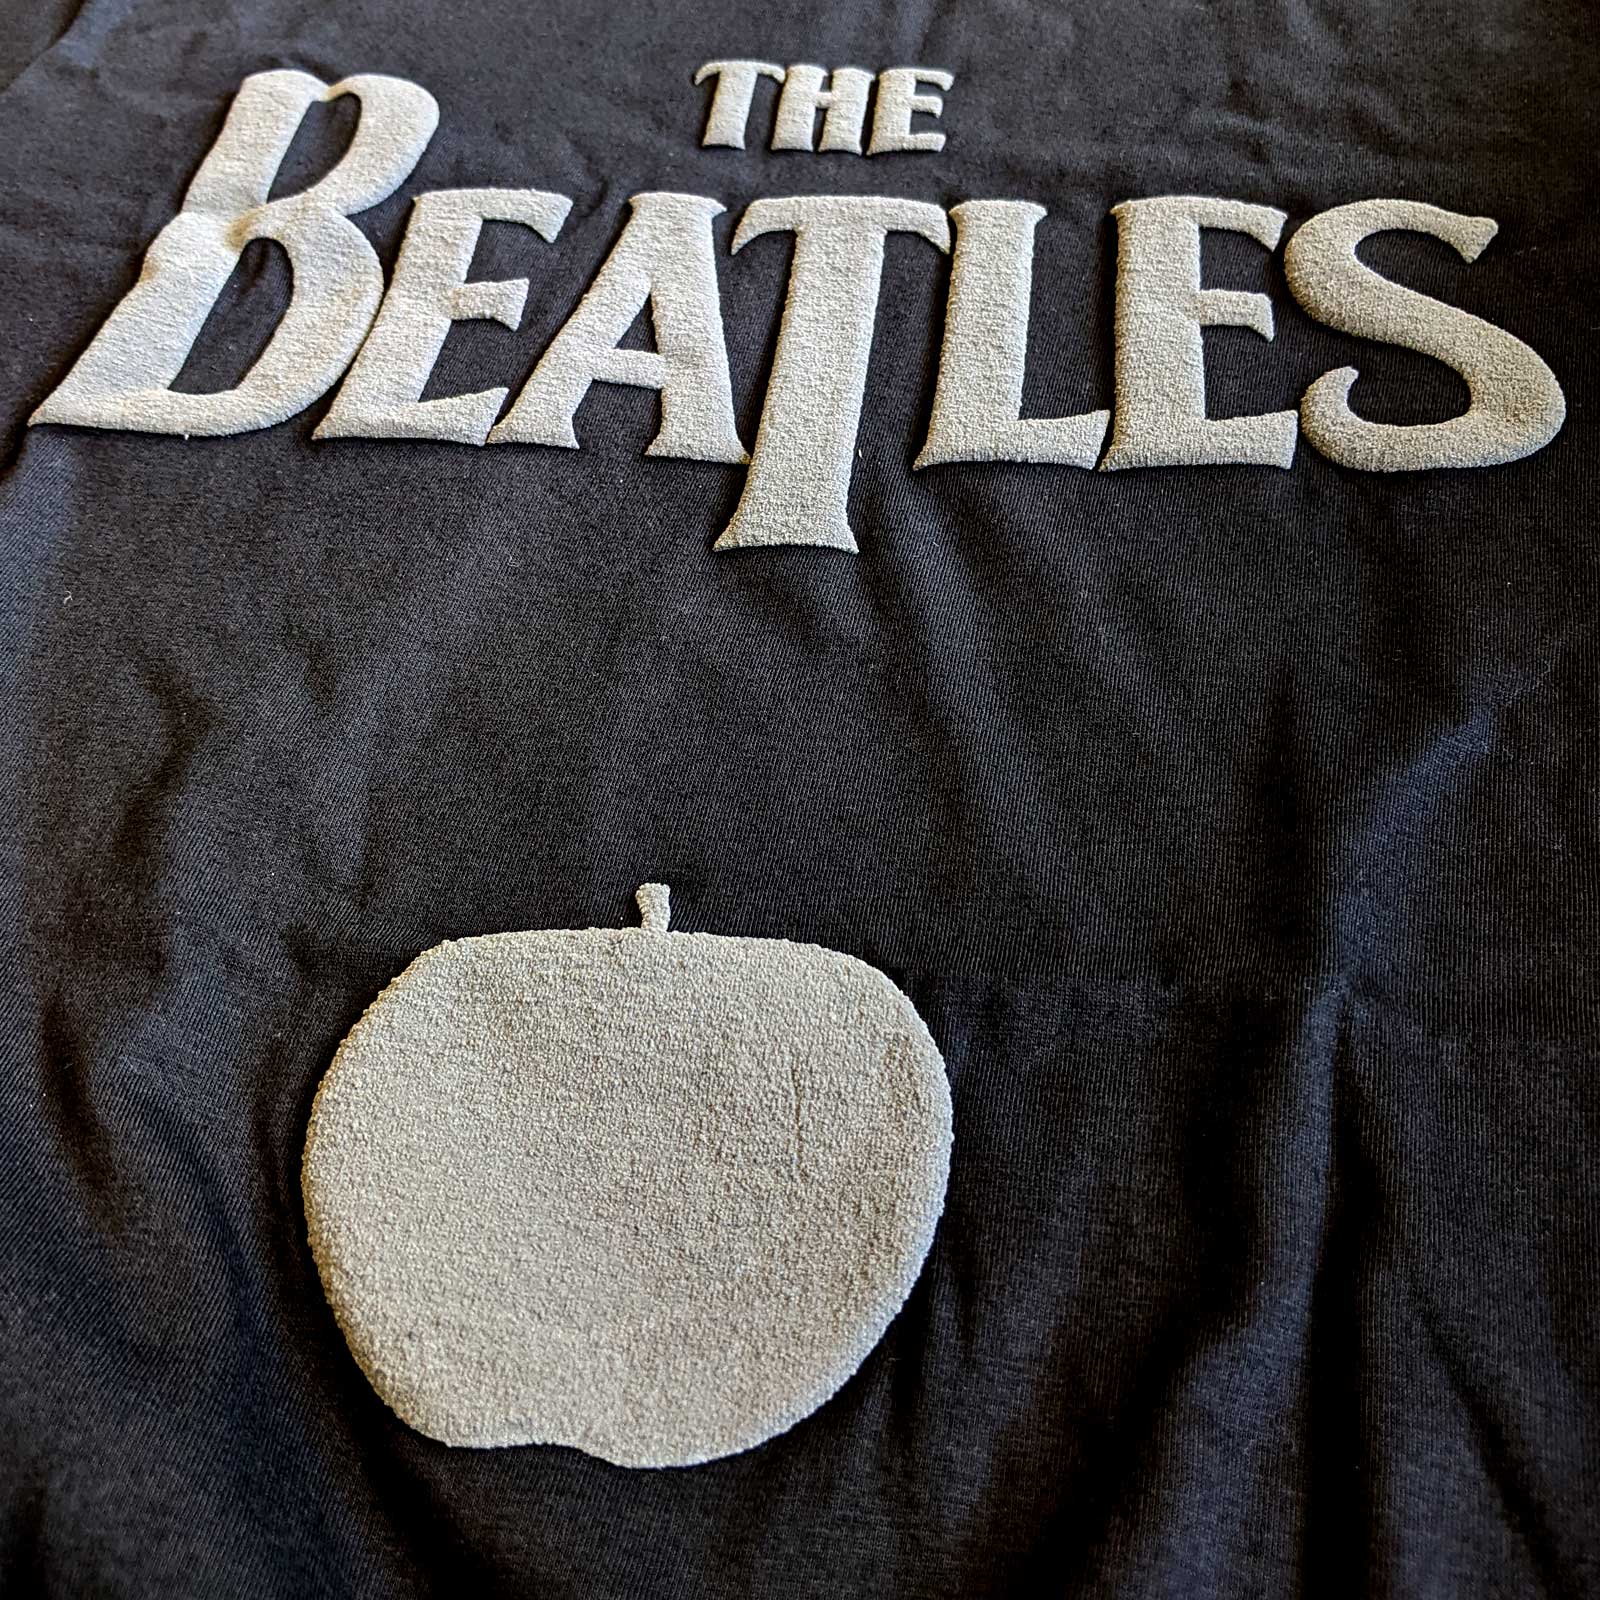 THE BEATLES Drop T Logo And Apple